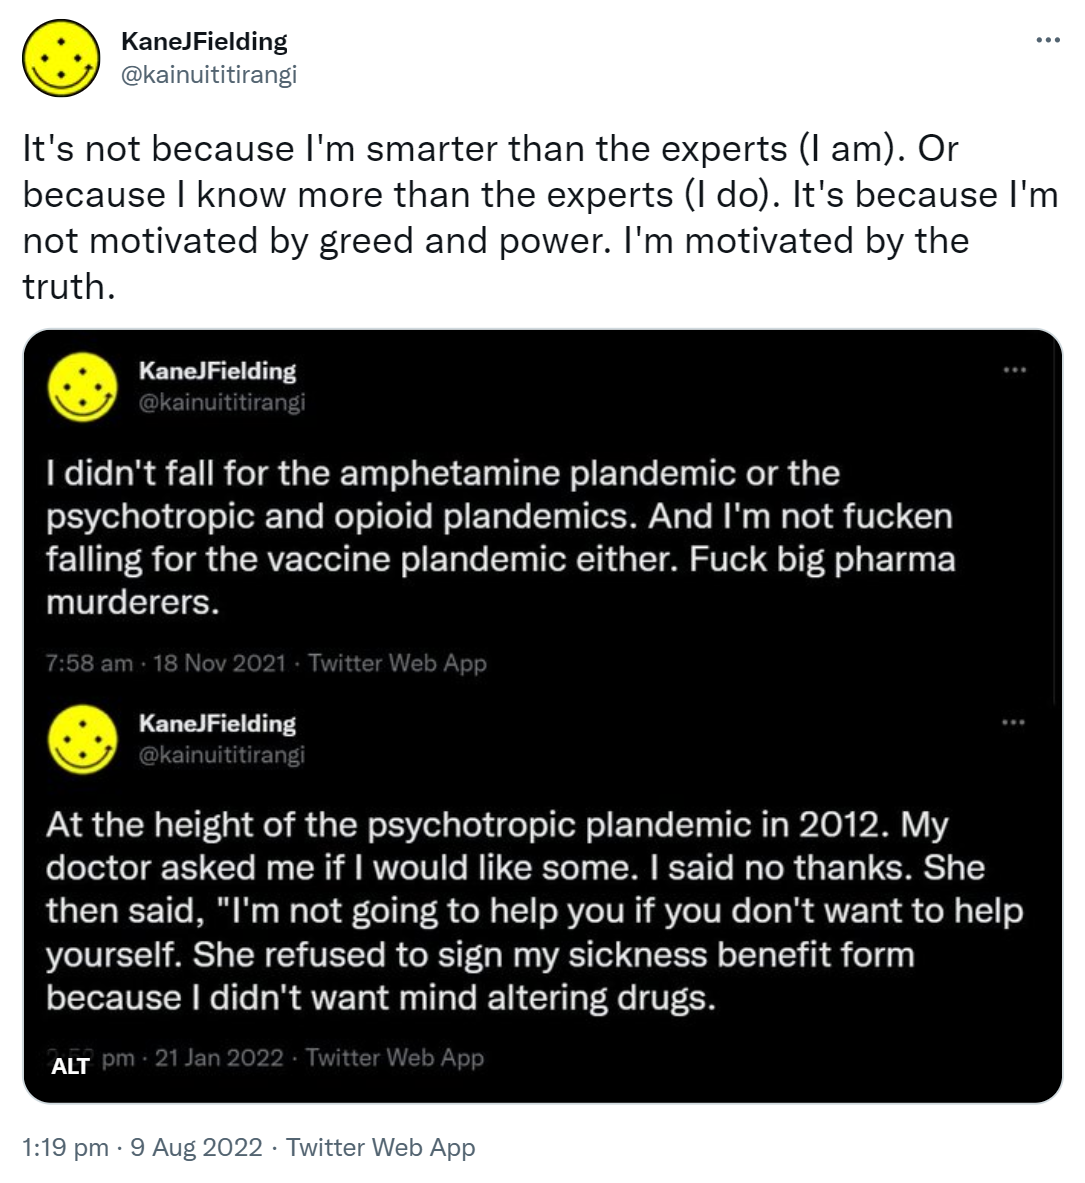 It's not because I'm smarter than the experts (I am). Or because I know more than the experts (I do). It's because I'm not motivated by greed and power. I'm motivated by the truth. I didn't fall for the amphetamine plandemic or the psychotropic and opioid plandemics. And I'm not fucken falling for the vaccine plandemic either. Fuck big pharma murderers. At the height of the psychotropic plandemic in 2012. My doctor asked me if I would like some. I said no thanks. She then said, I'm not going to help you if you don't want to help yourself. She refused to sign my sickness benefit form because I didn't want mind altering drugs. 1:19 pm · 9 Aug 2022.